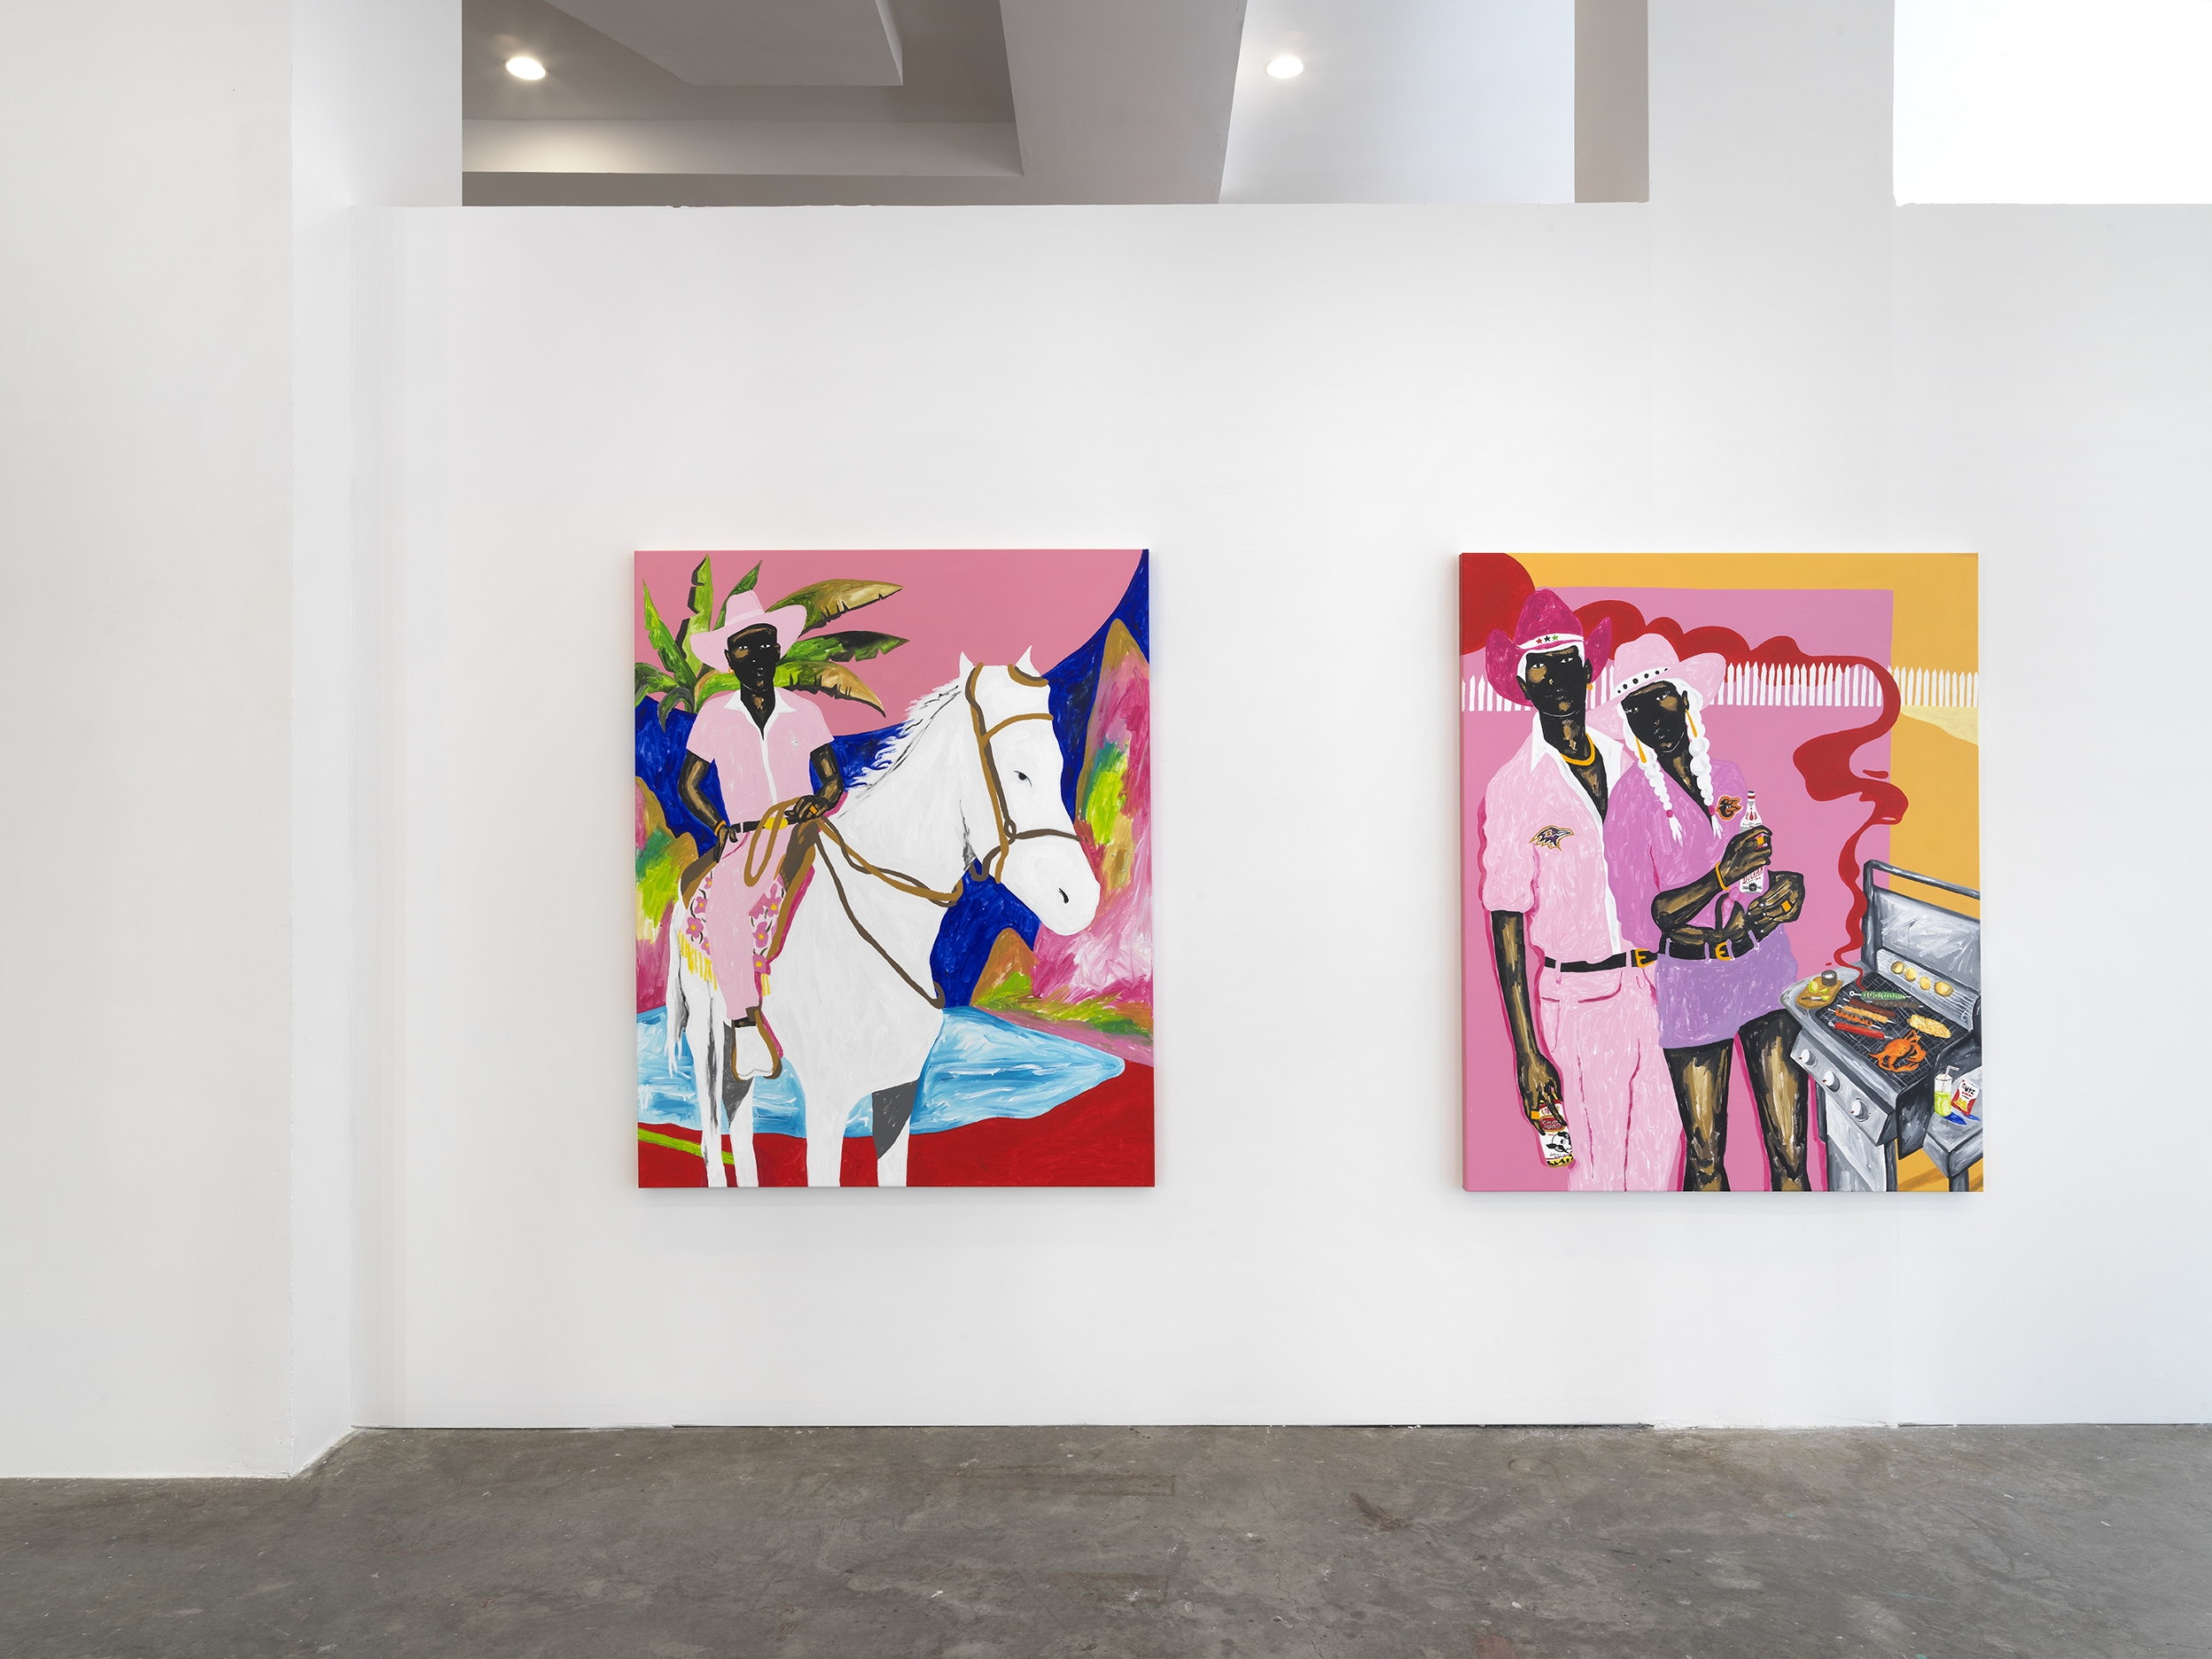 Artista Zéh Palito, Won't You Celebrate With Me, curated by Larry Ossei-Mensah (Luce Gallery, New York, NY) - Zéh Palito, Won't You Celebrate With Me, curated by Larry Ossei-Mensah (Luce Gallery, New York, NY)